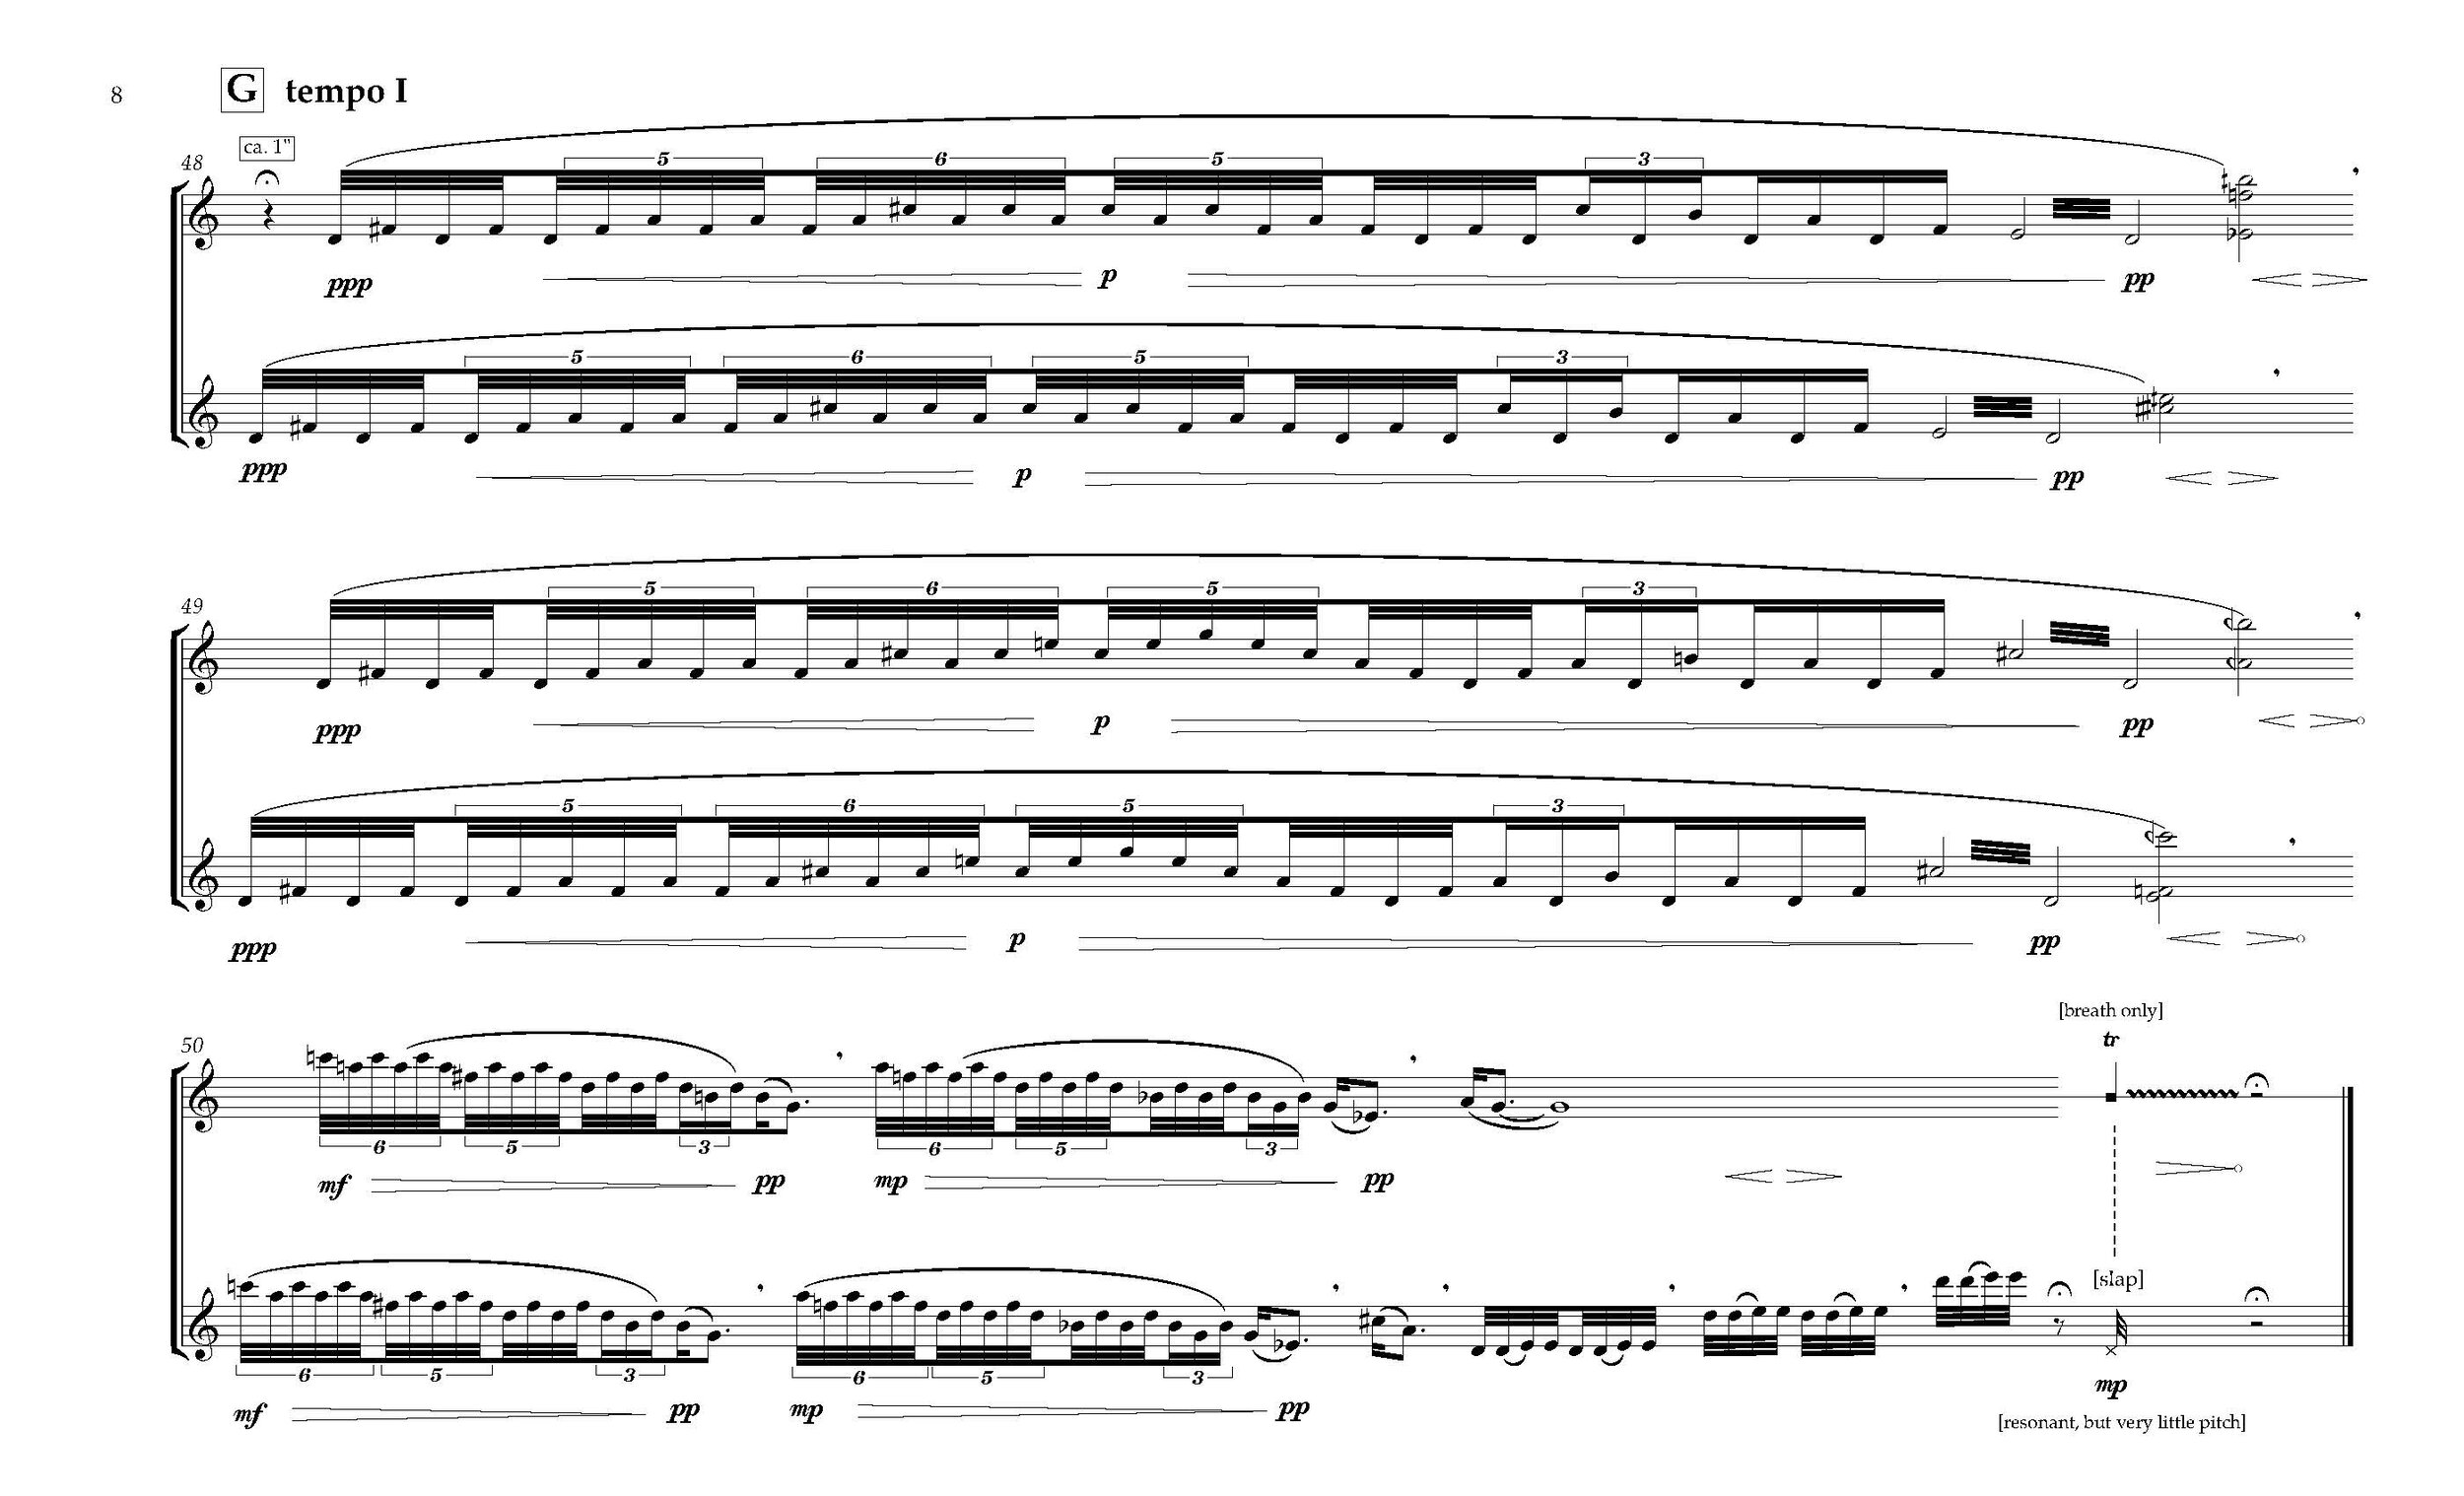 One Final Gyre - Complete Score_Page_16.jpg